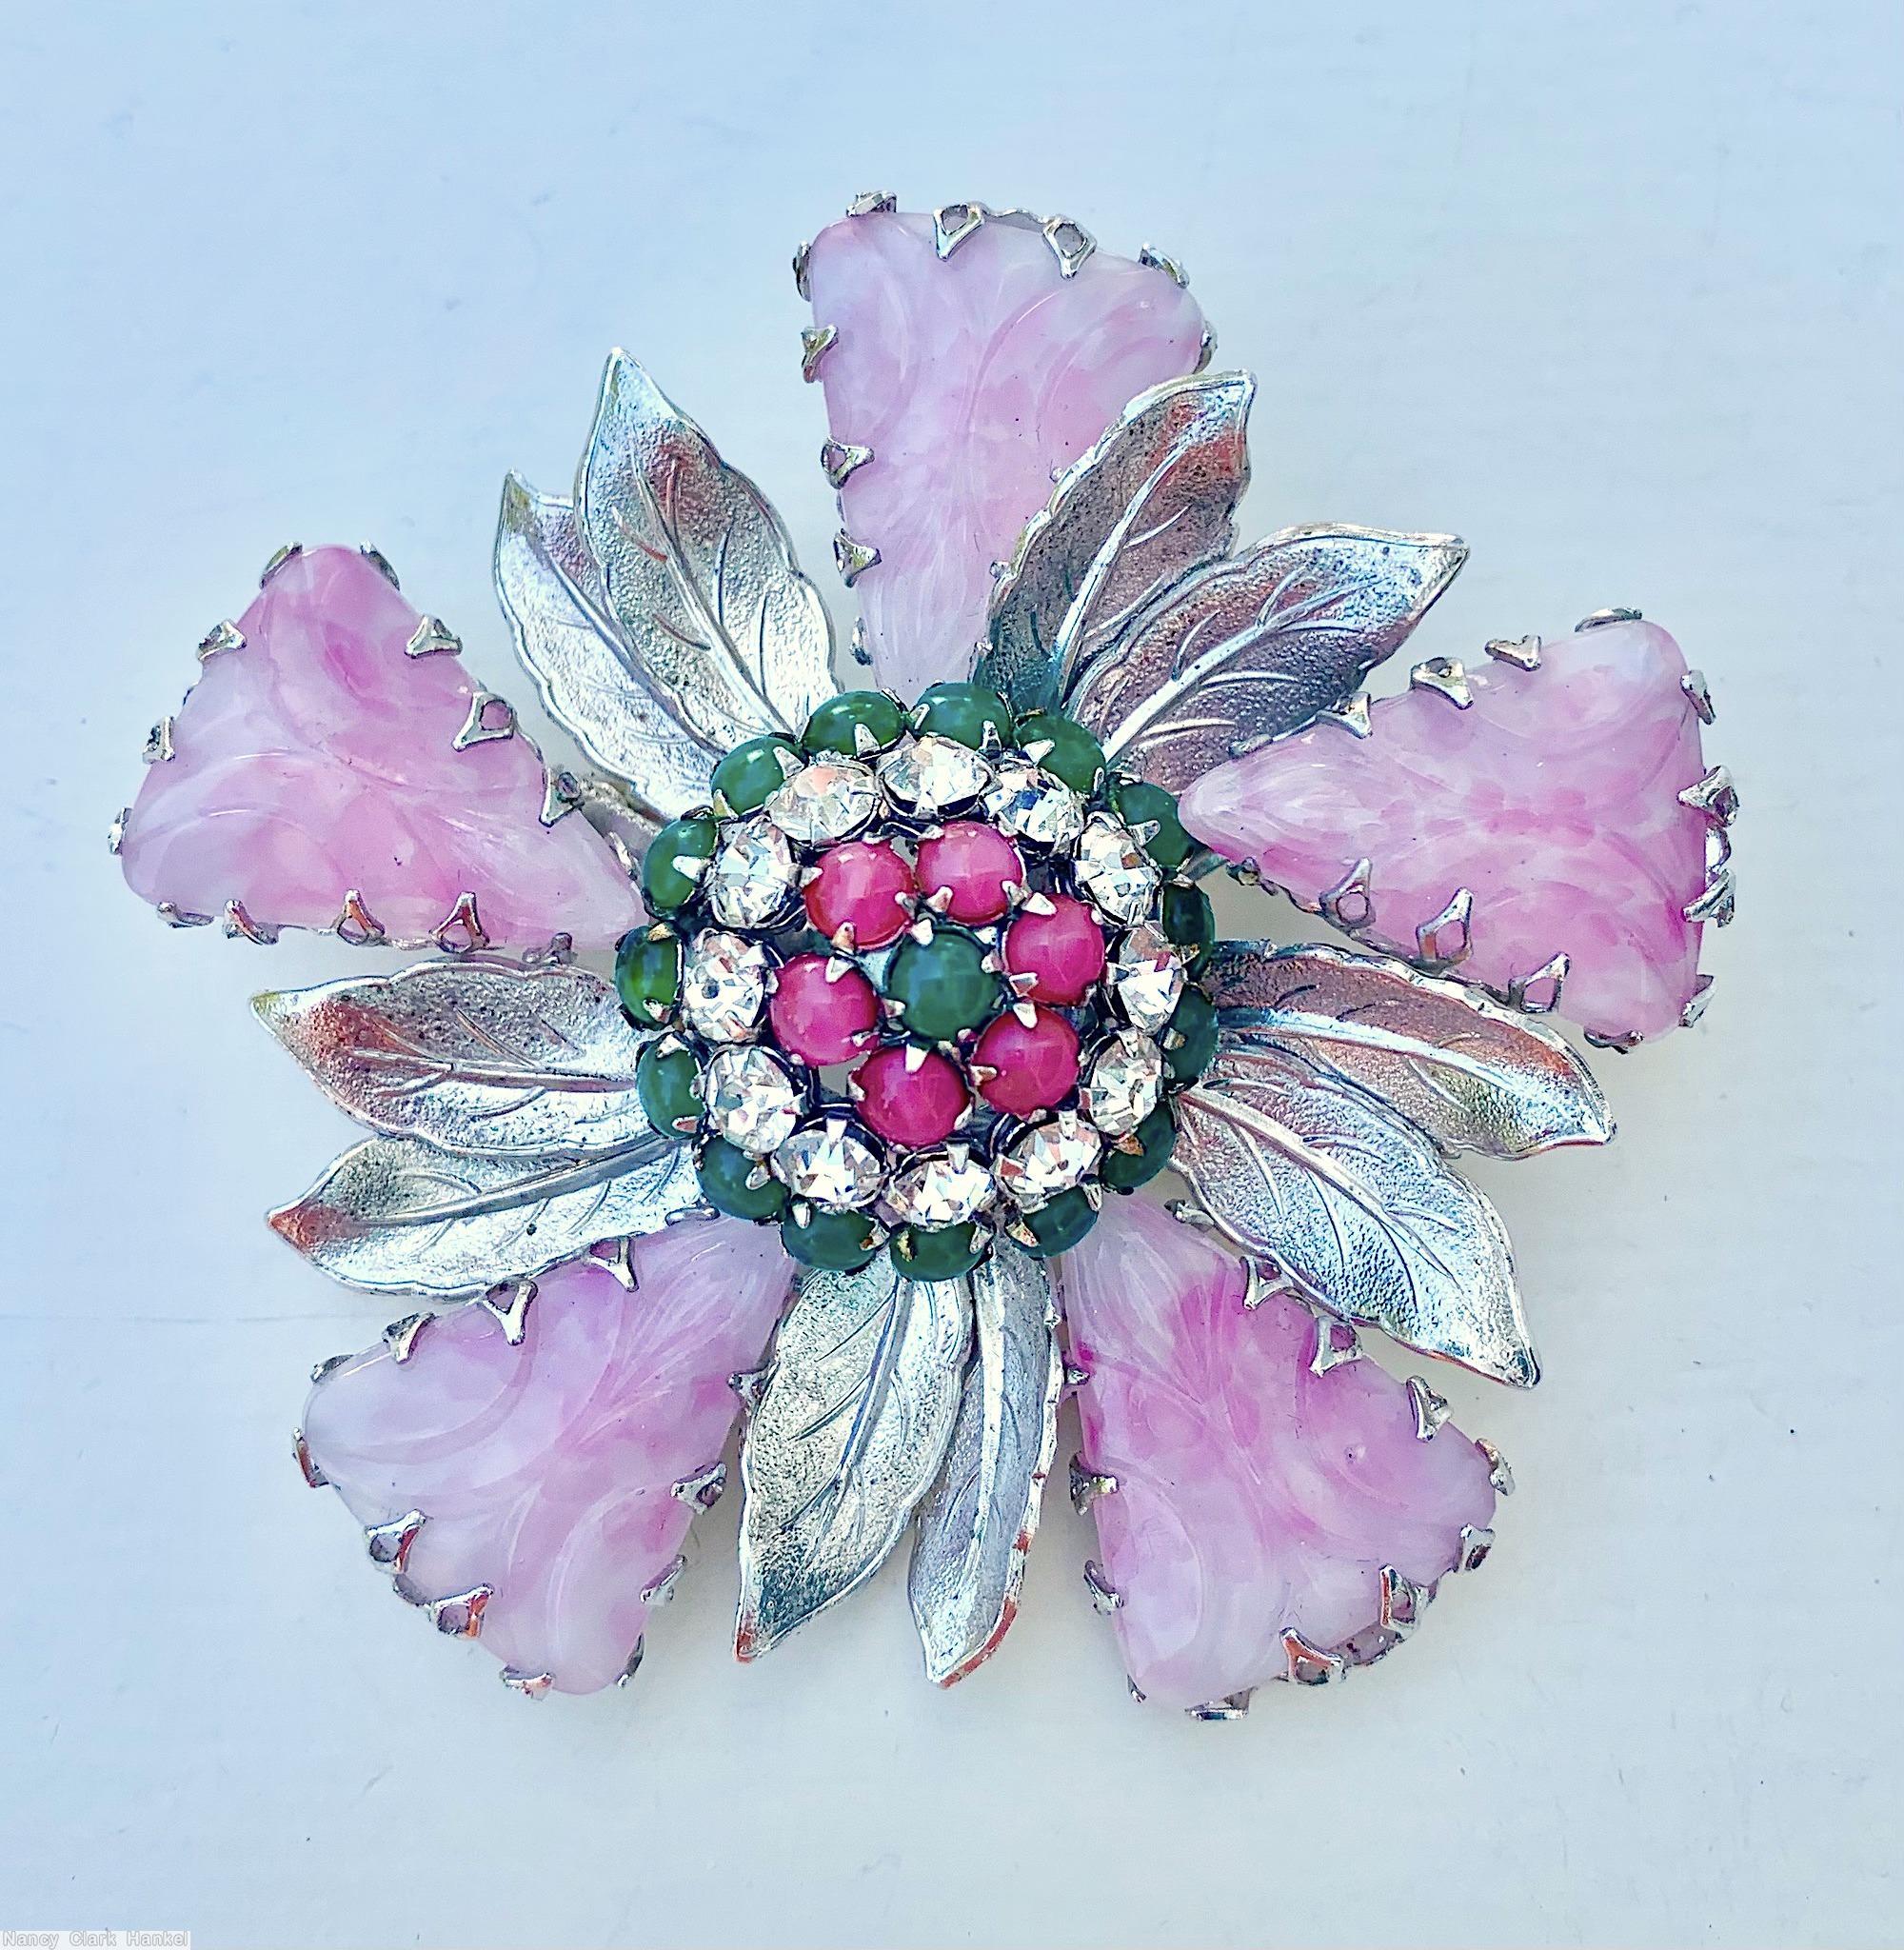 Schreiner 5 triangle petal 10 metal leaf radial pin clustered center marbled pink carved art glass silver metalic green crystal coral jewelry